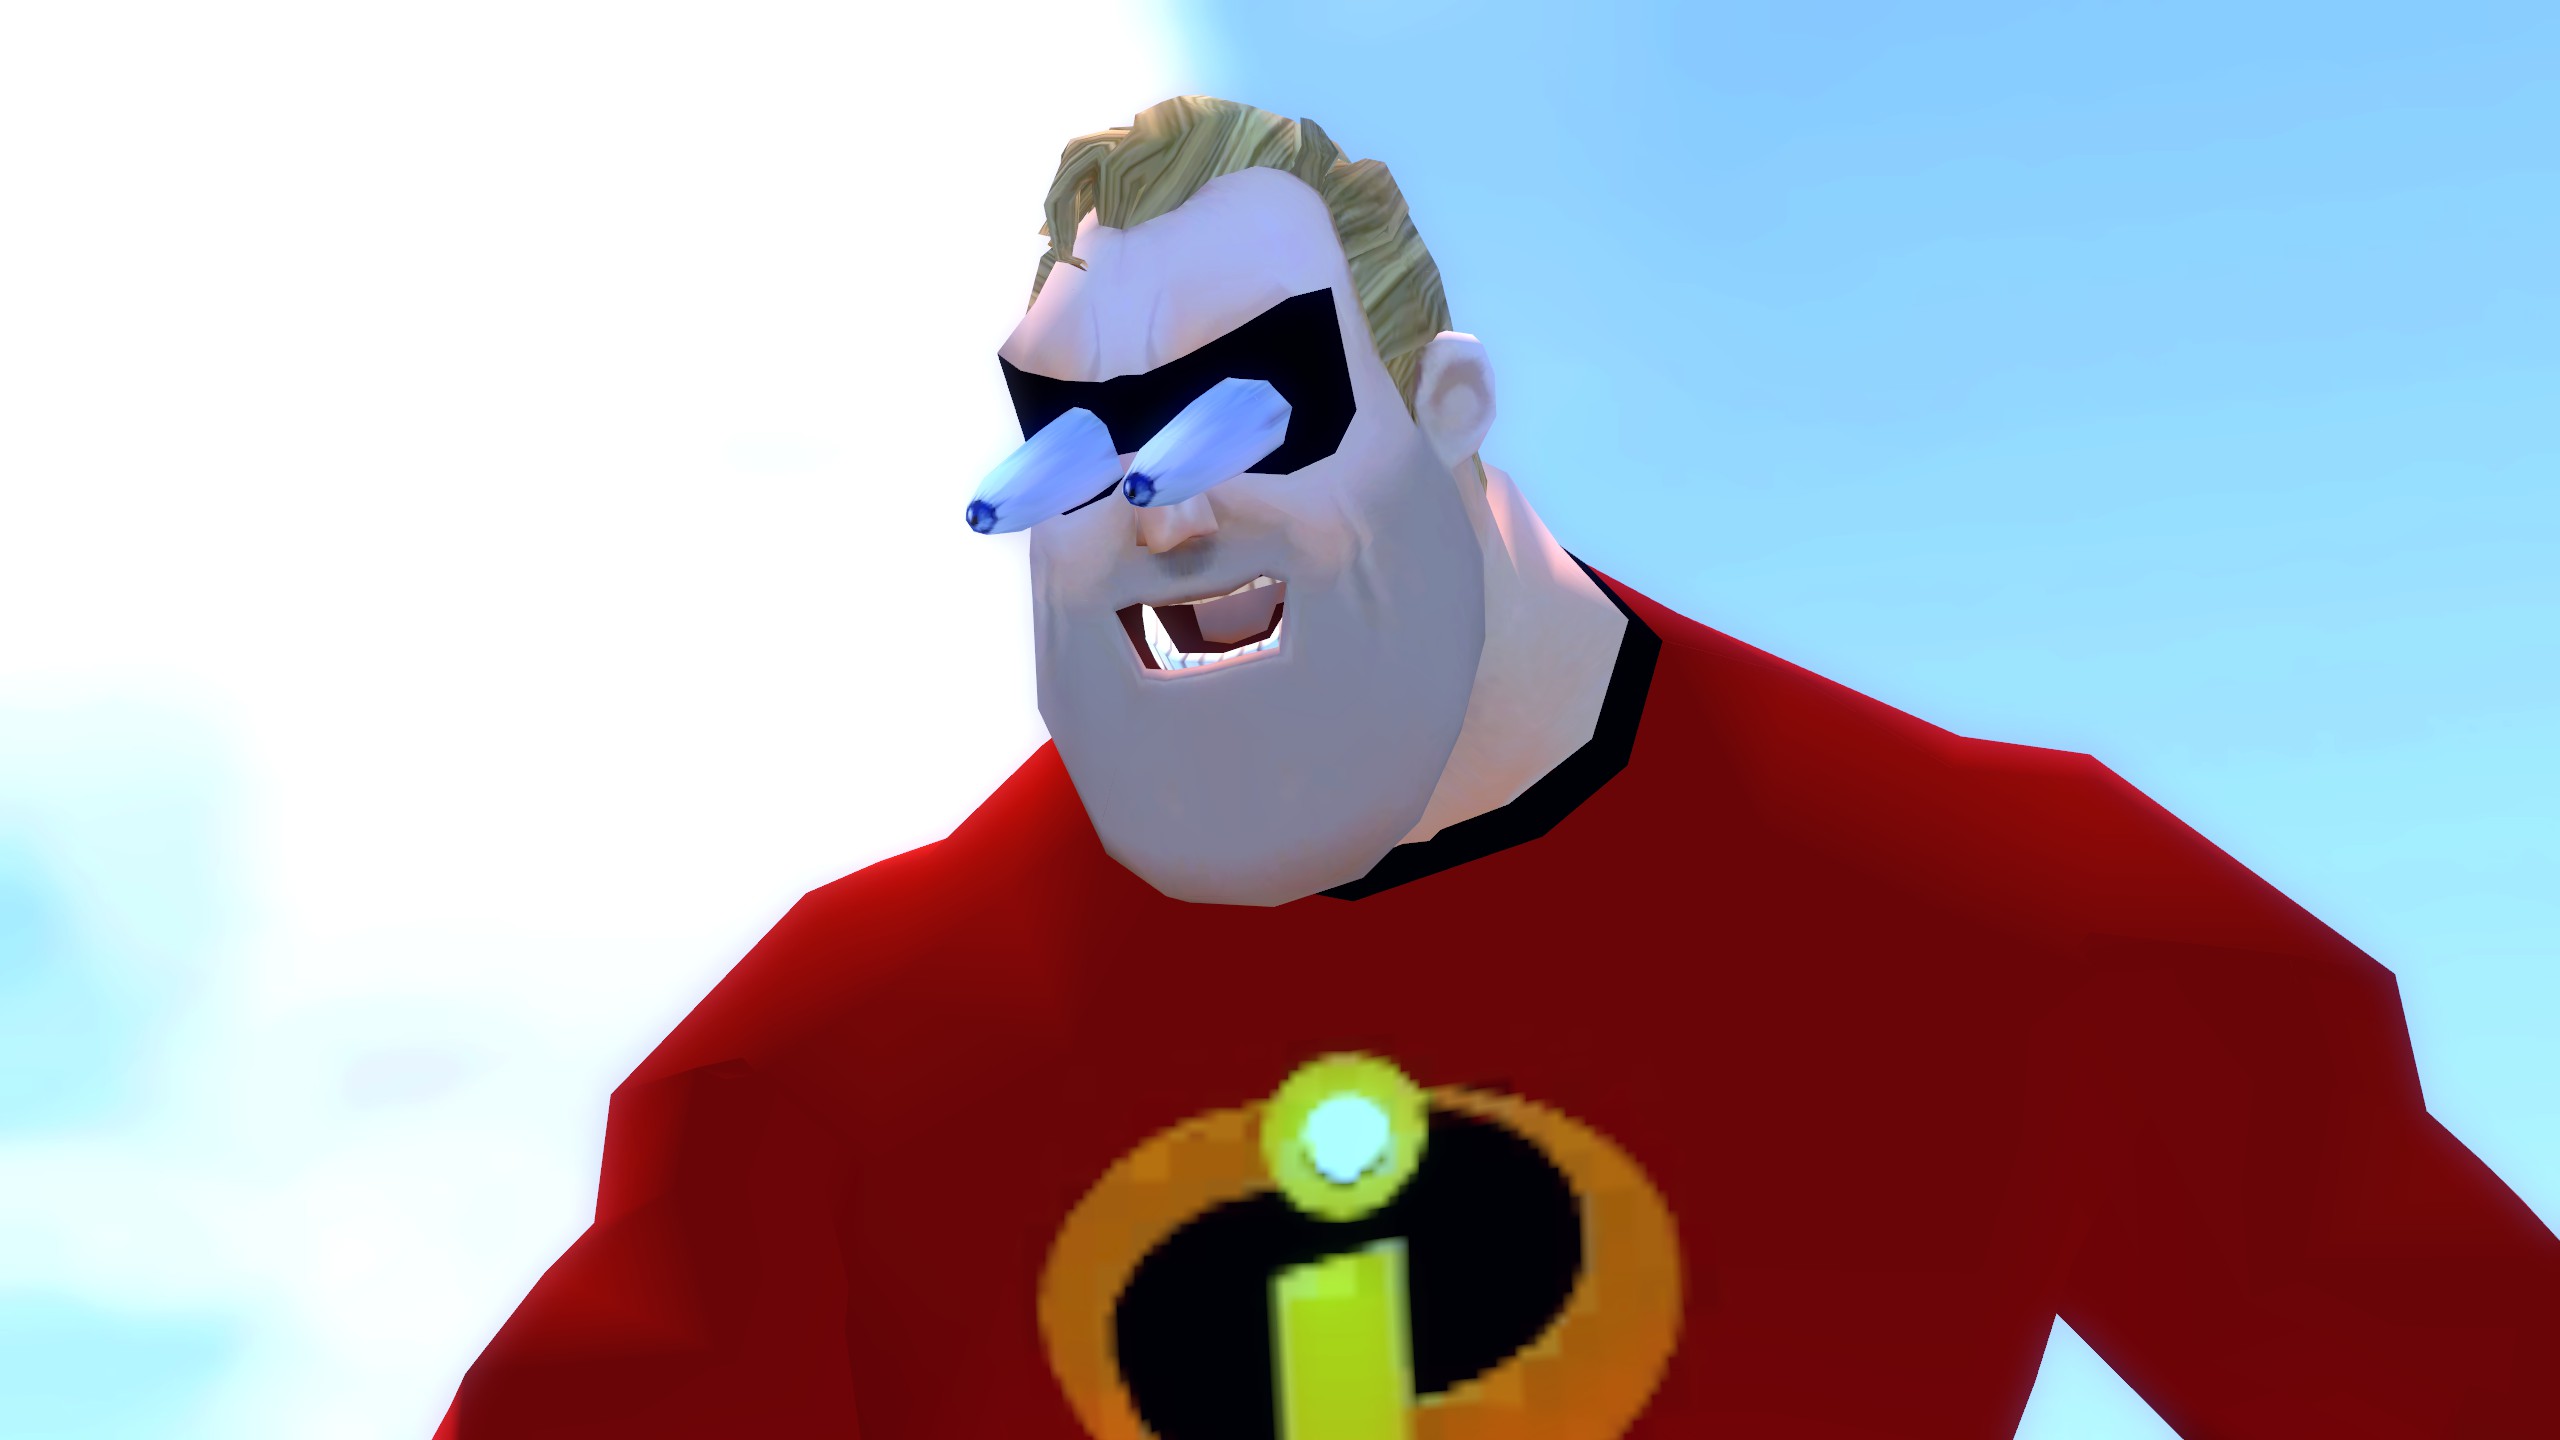 Mr. Incredible becoming Canny Favorite Characters by RedKirb on DeviantArt